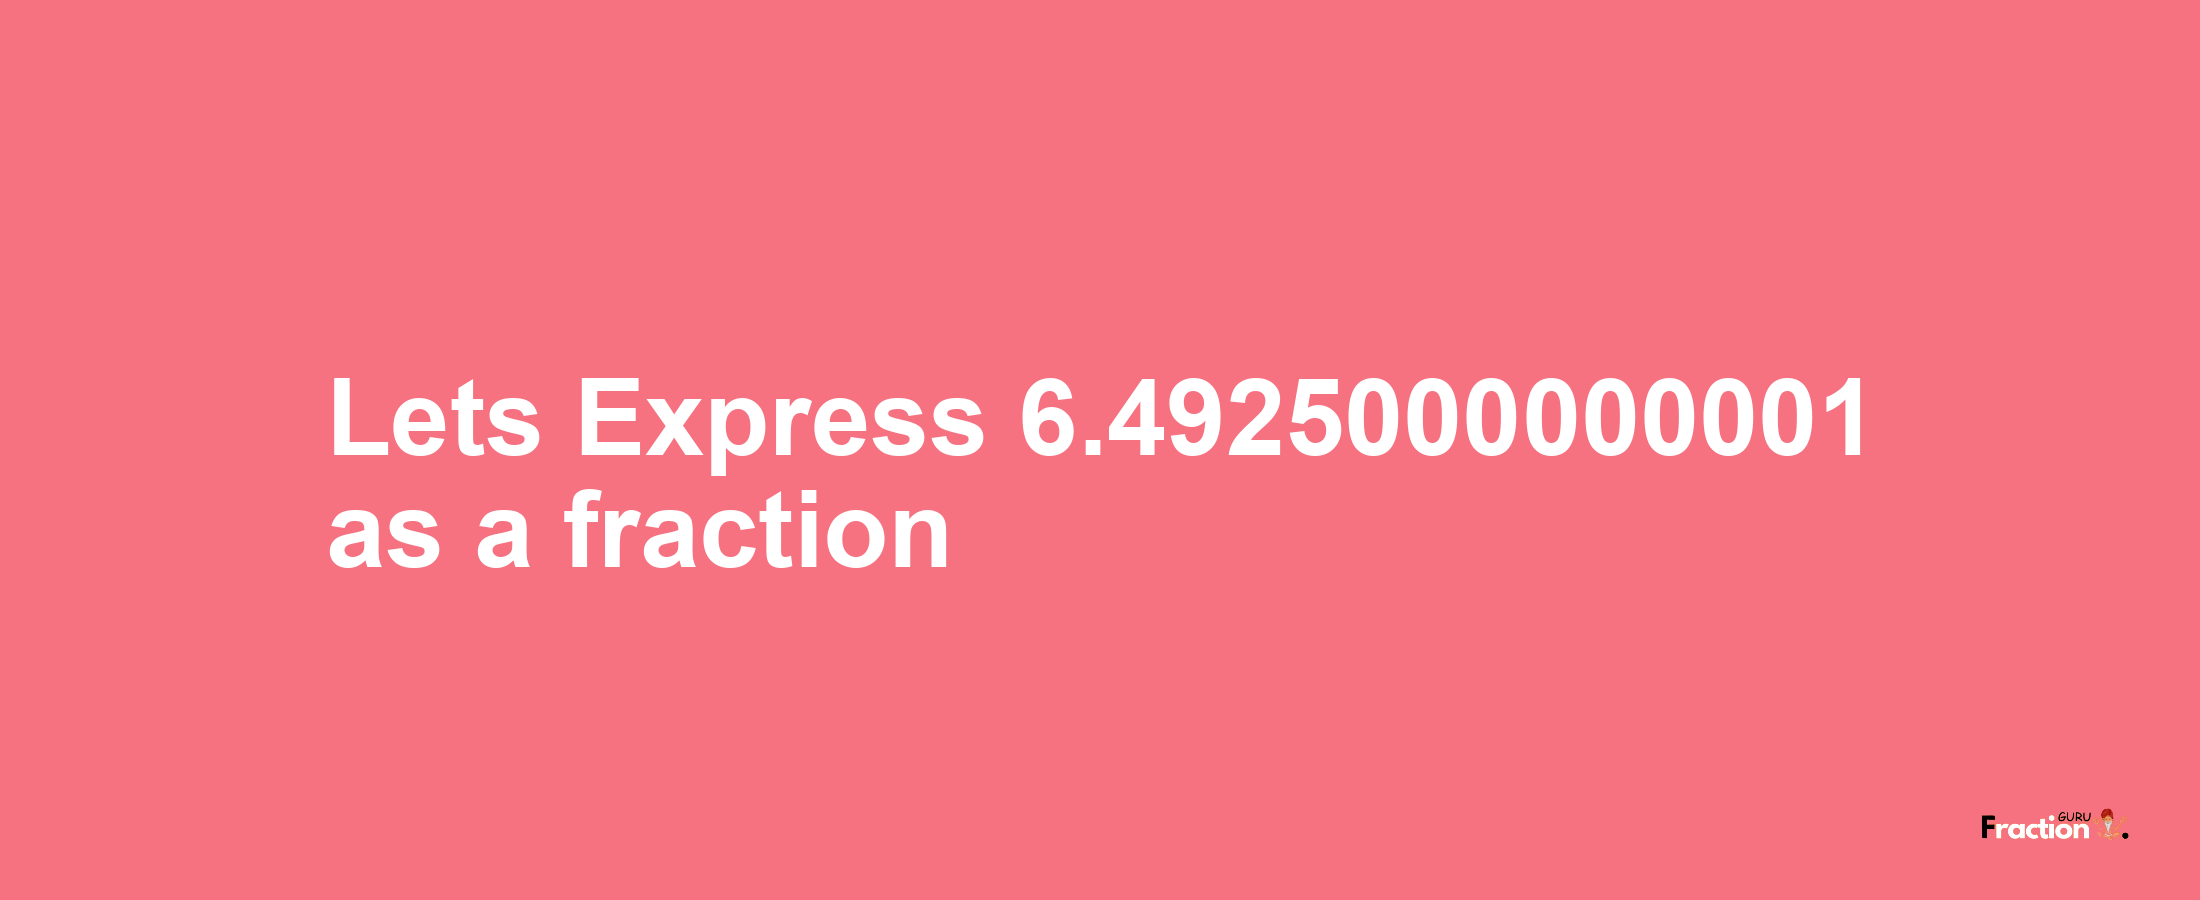 Lets Express 6.4925000000001 as afraction